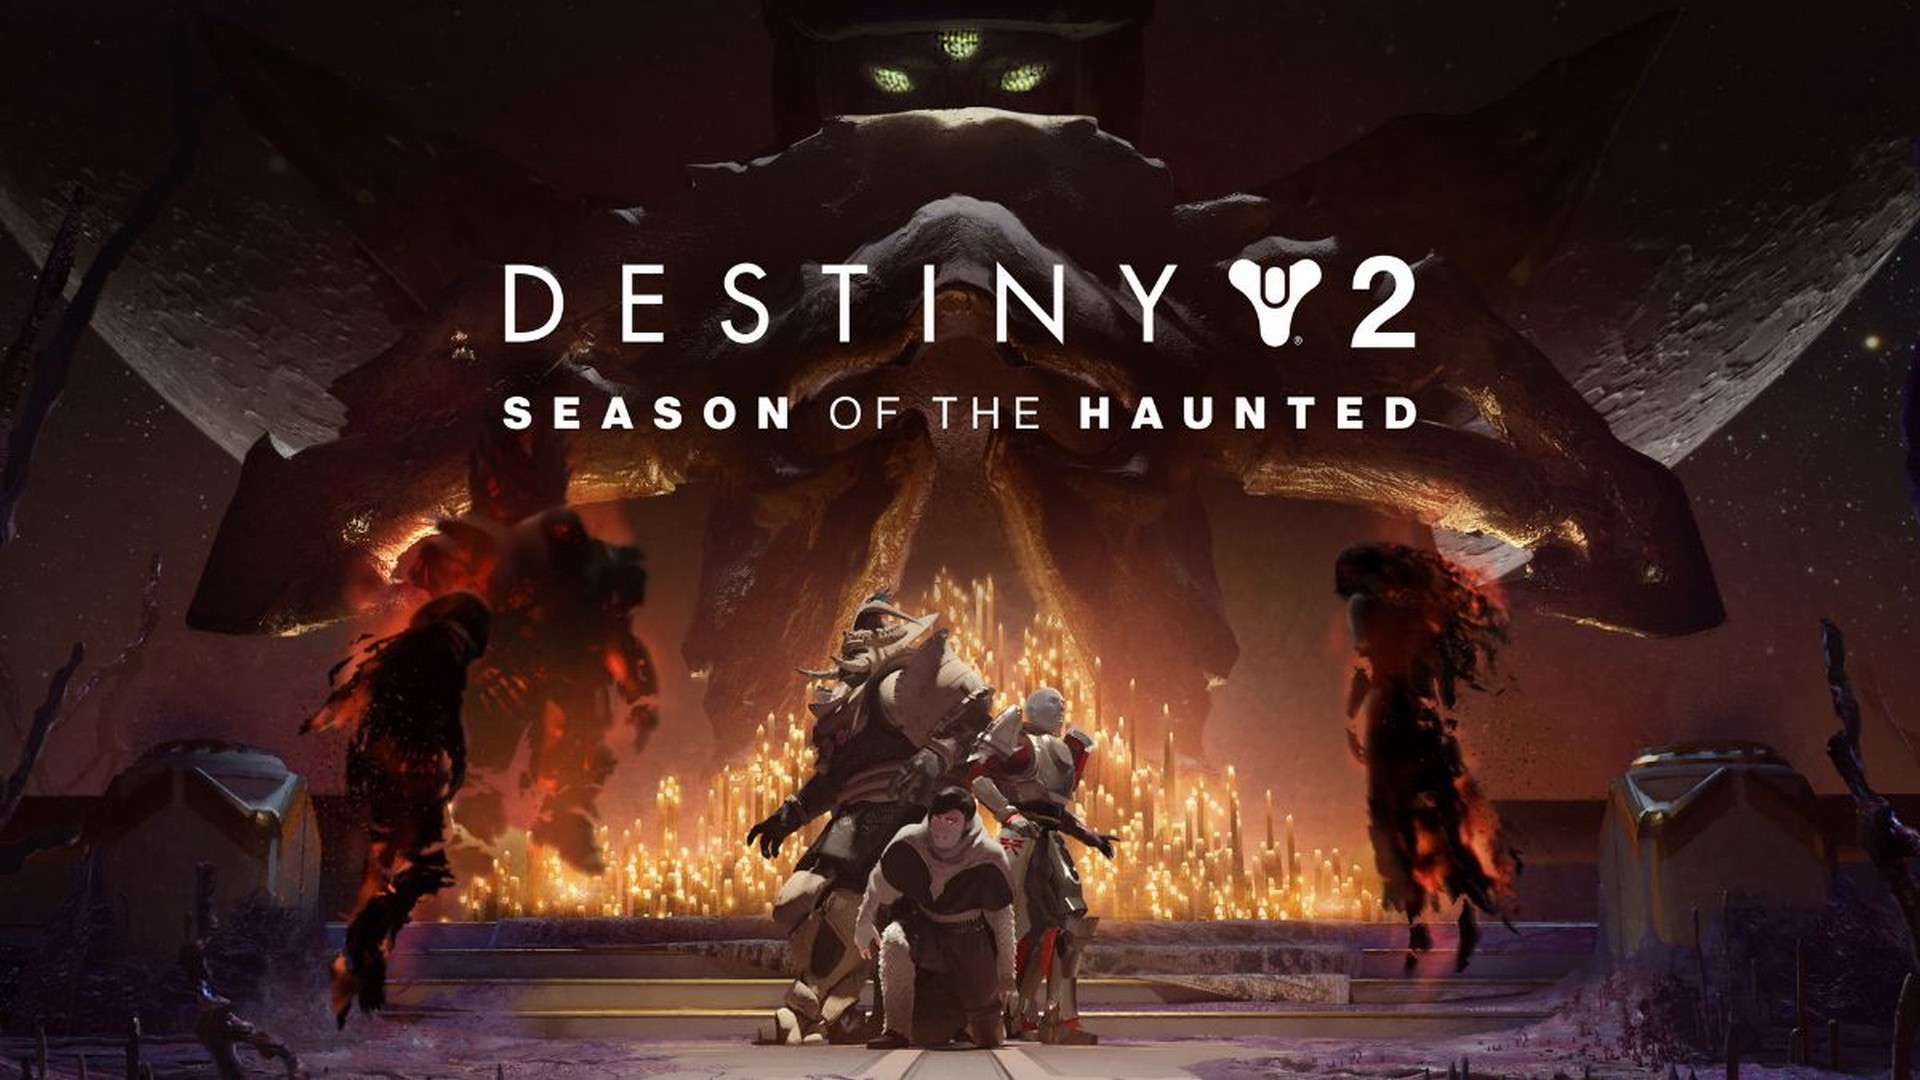 Become The Reaper In Destiny 2 With The Season Of The Haunted